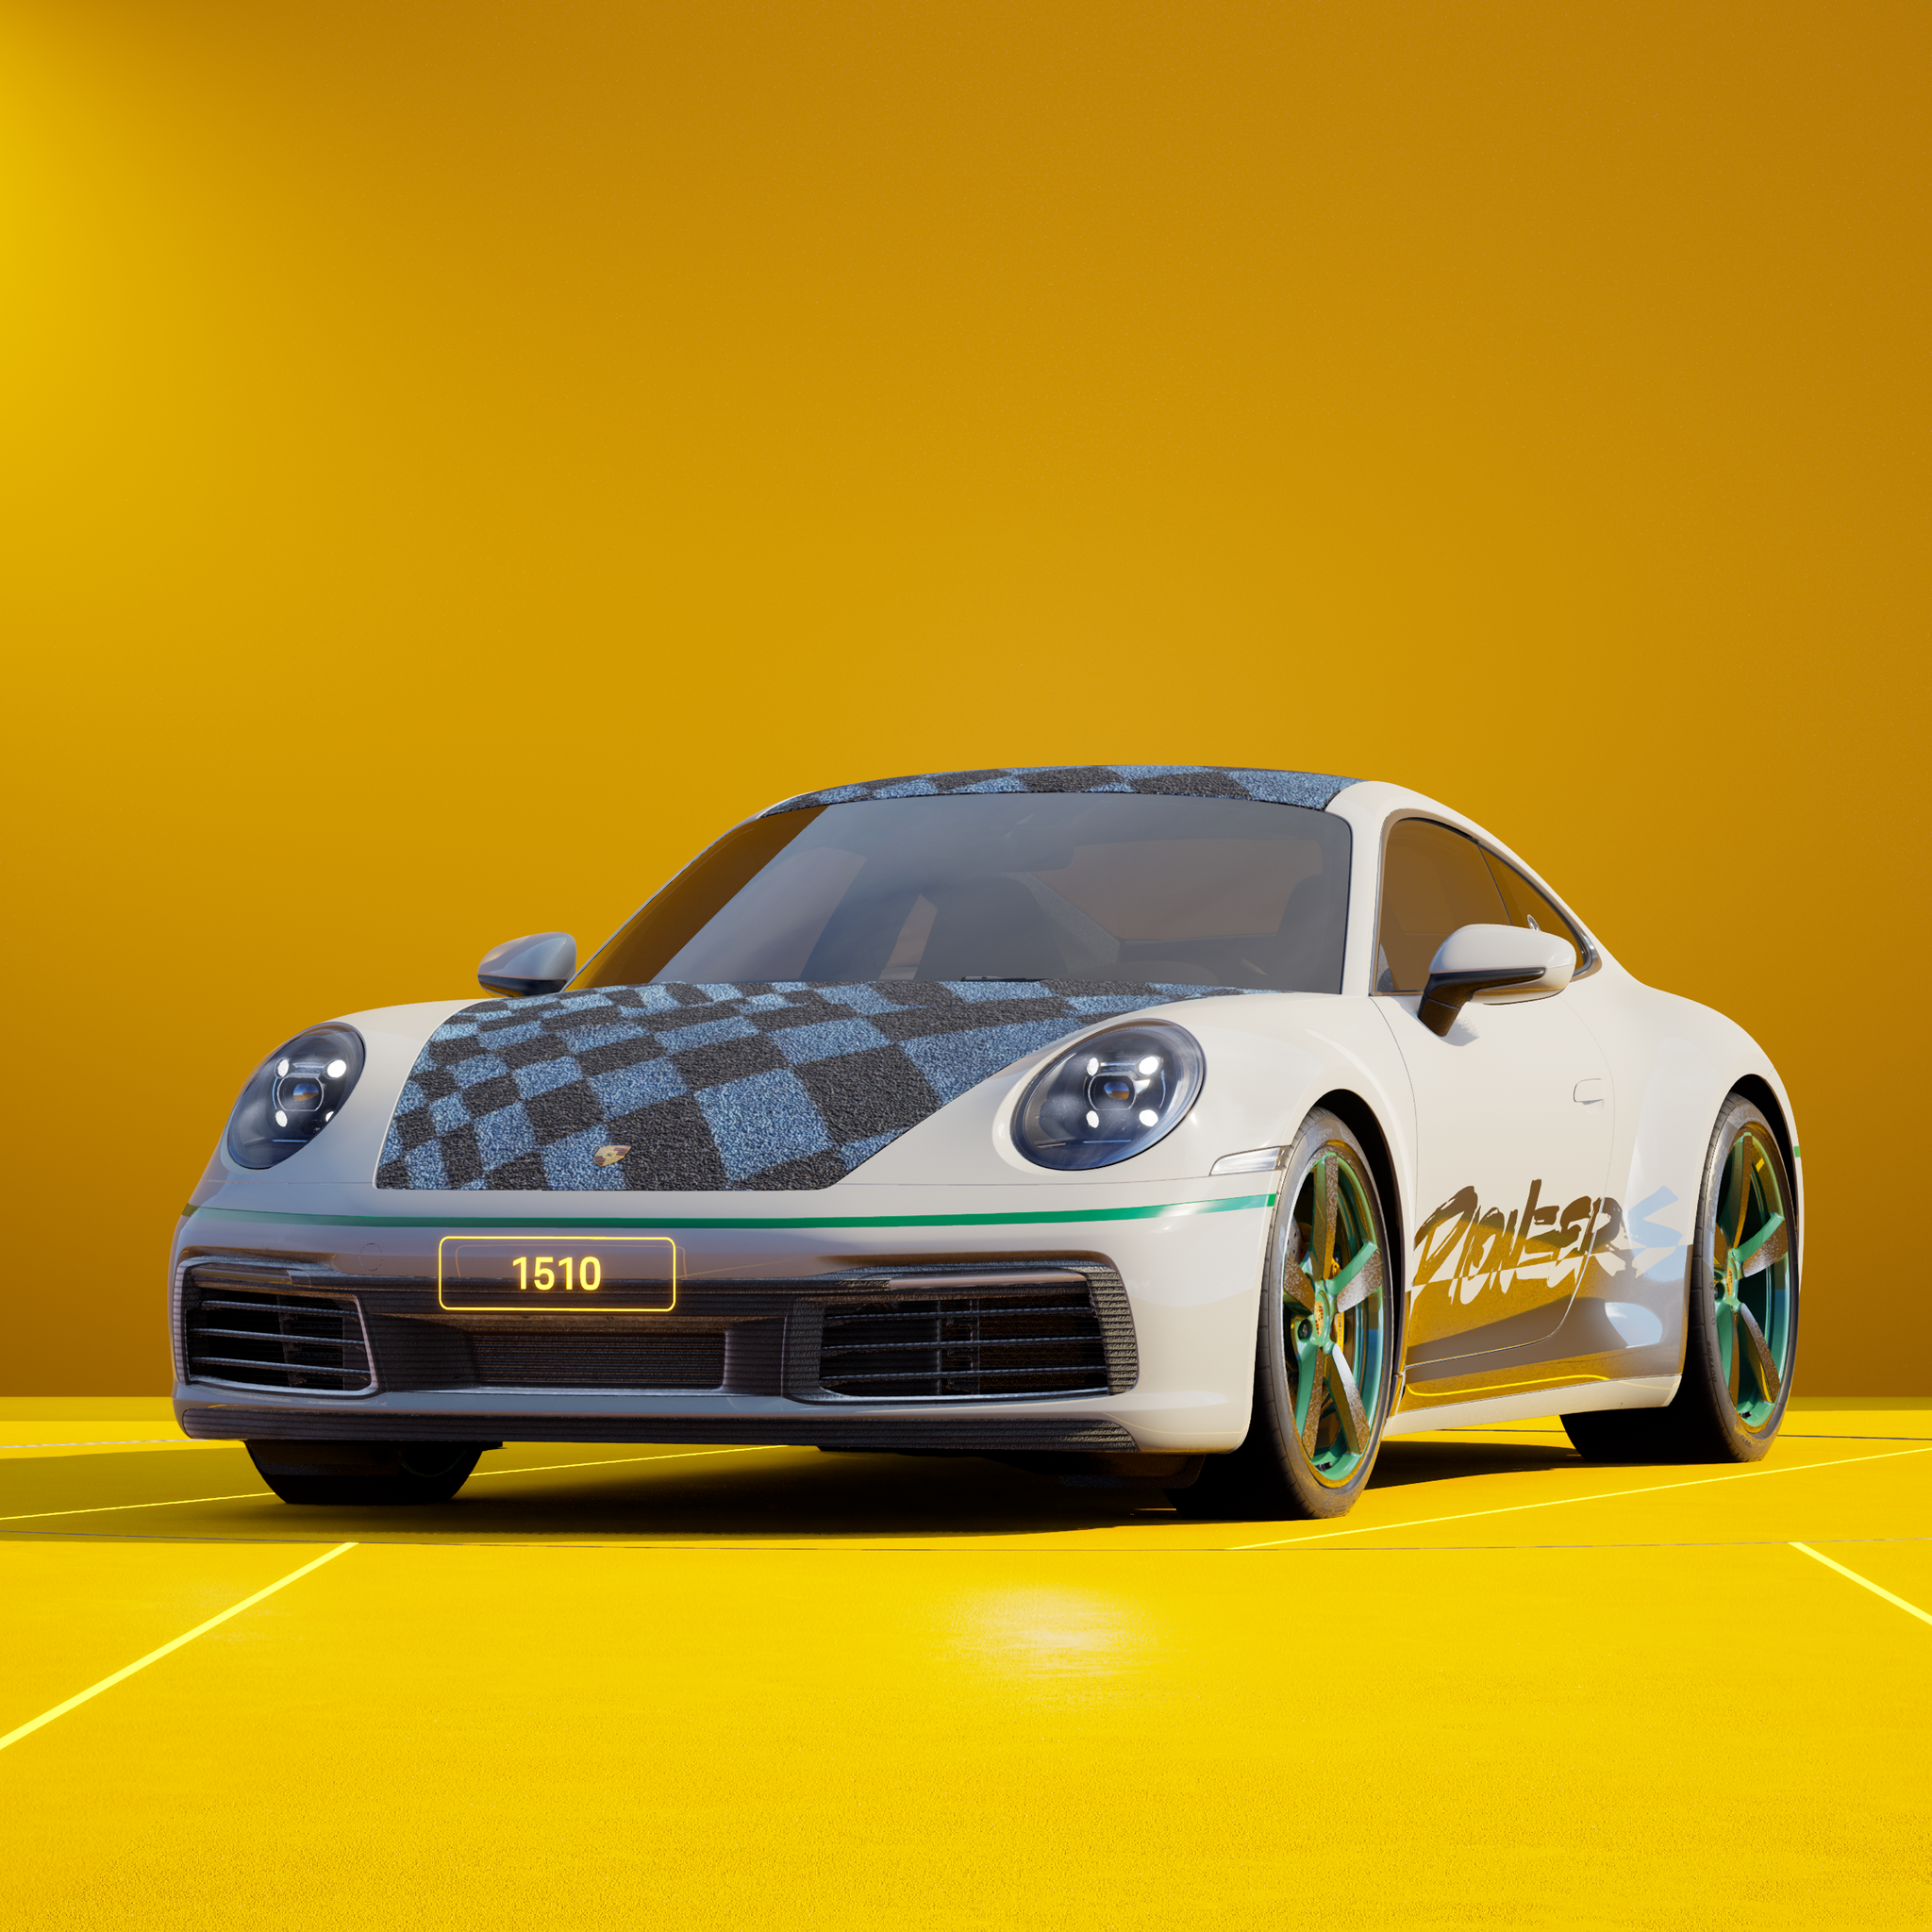 The PORSCHΞ 911 1510 image in phase